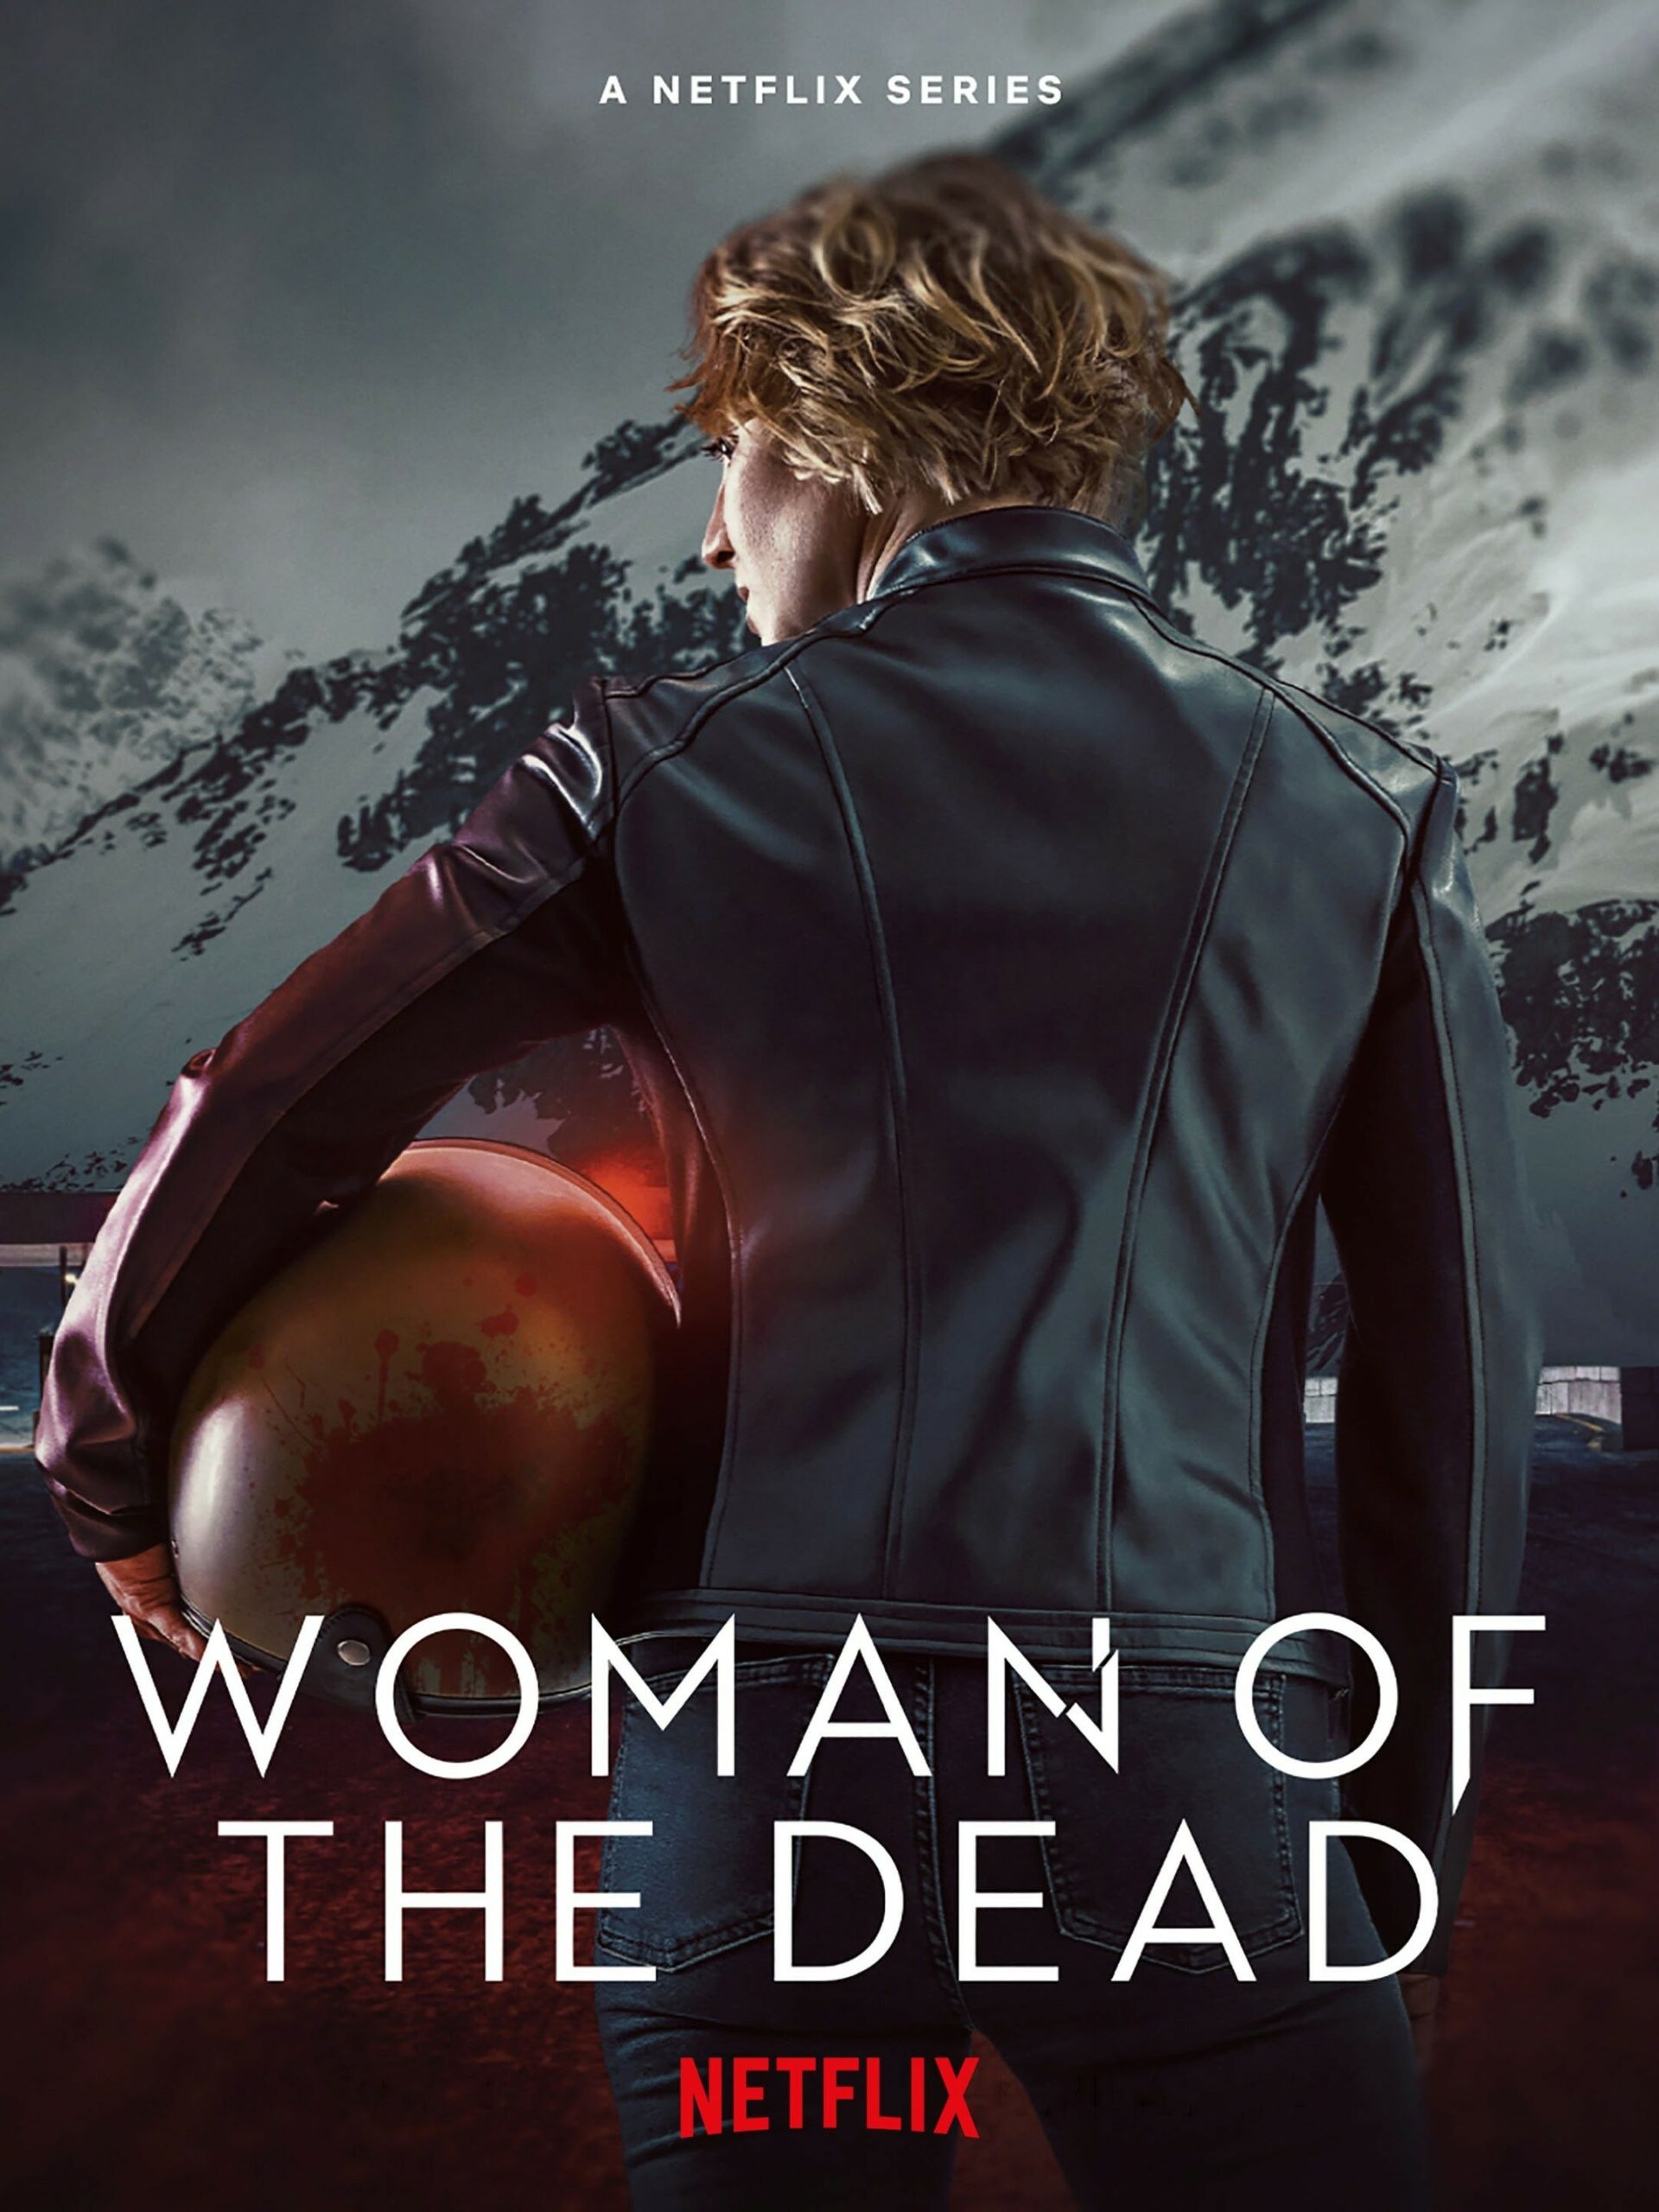 When is Woman of the Dead Season 2 Coming Out